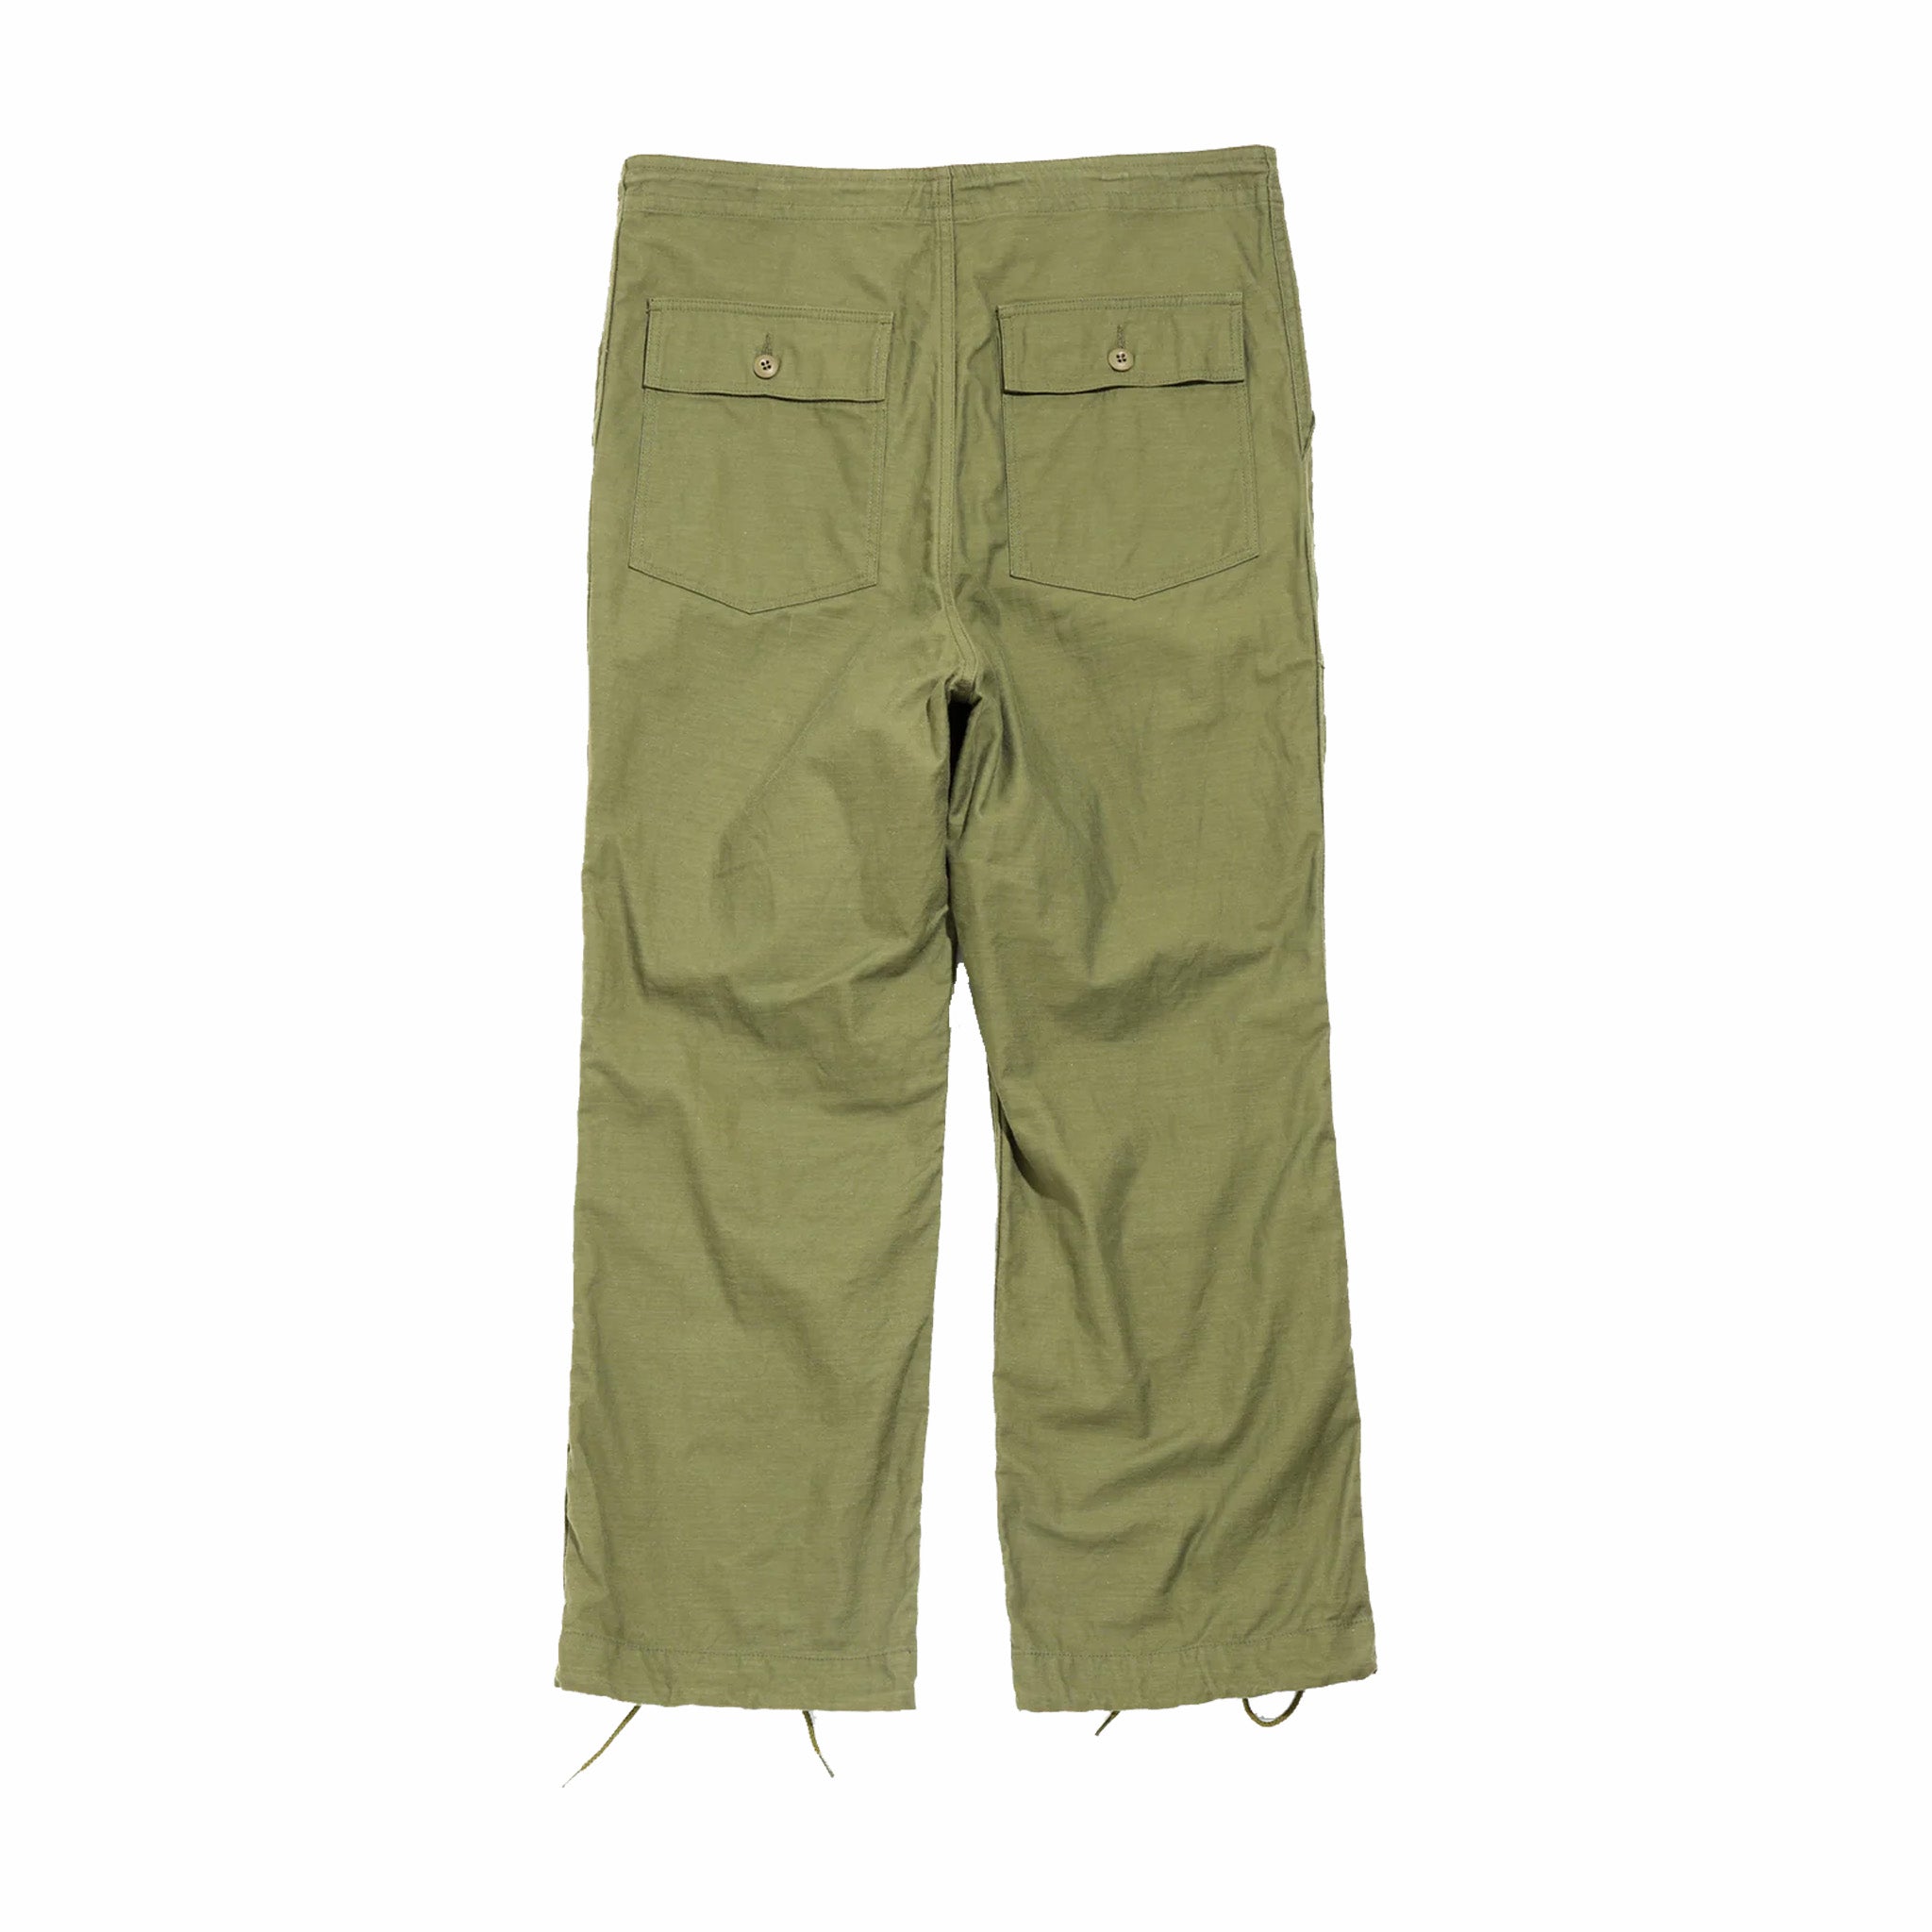 Needles String Fatigue Pant - Back Sateen (Olive)